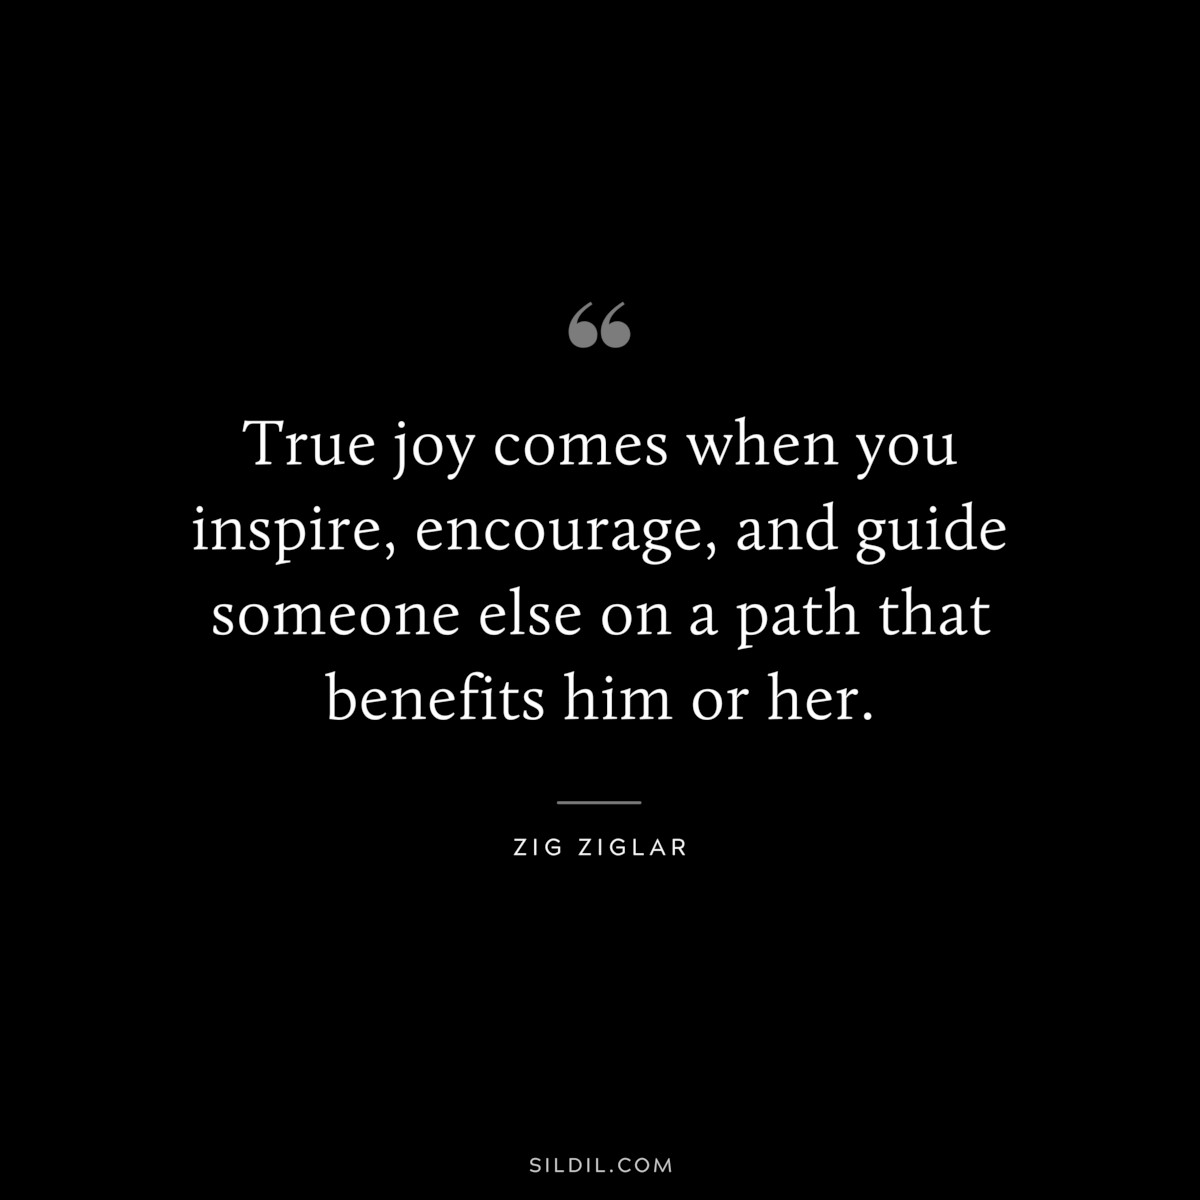 True joy comes when you inspire, encourage, and guide someone else on a path that benefits him or her. ― Zig Ziglar